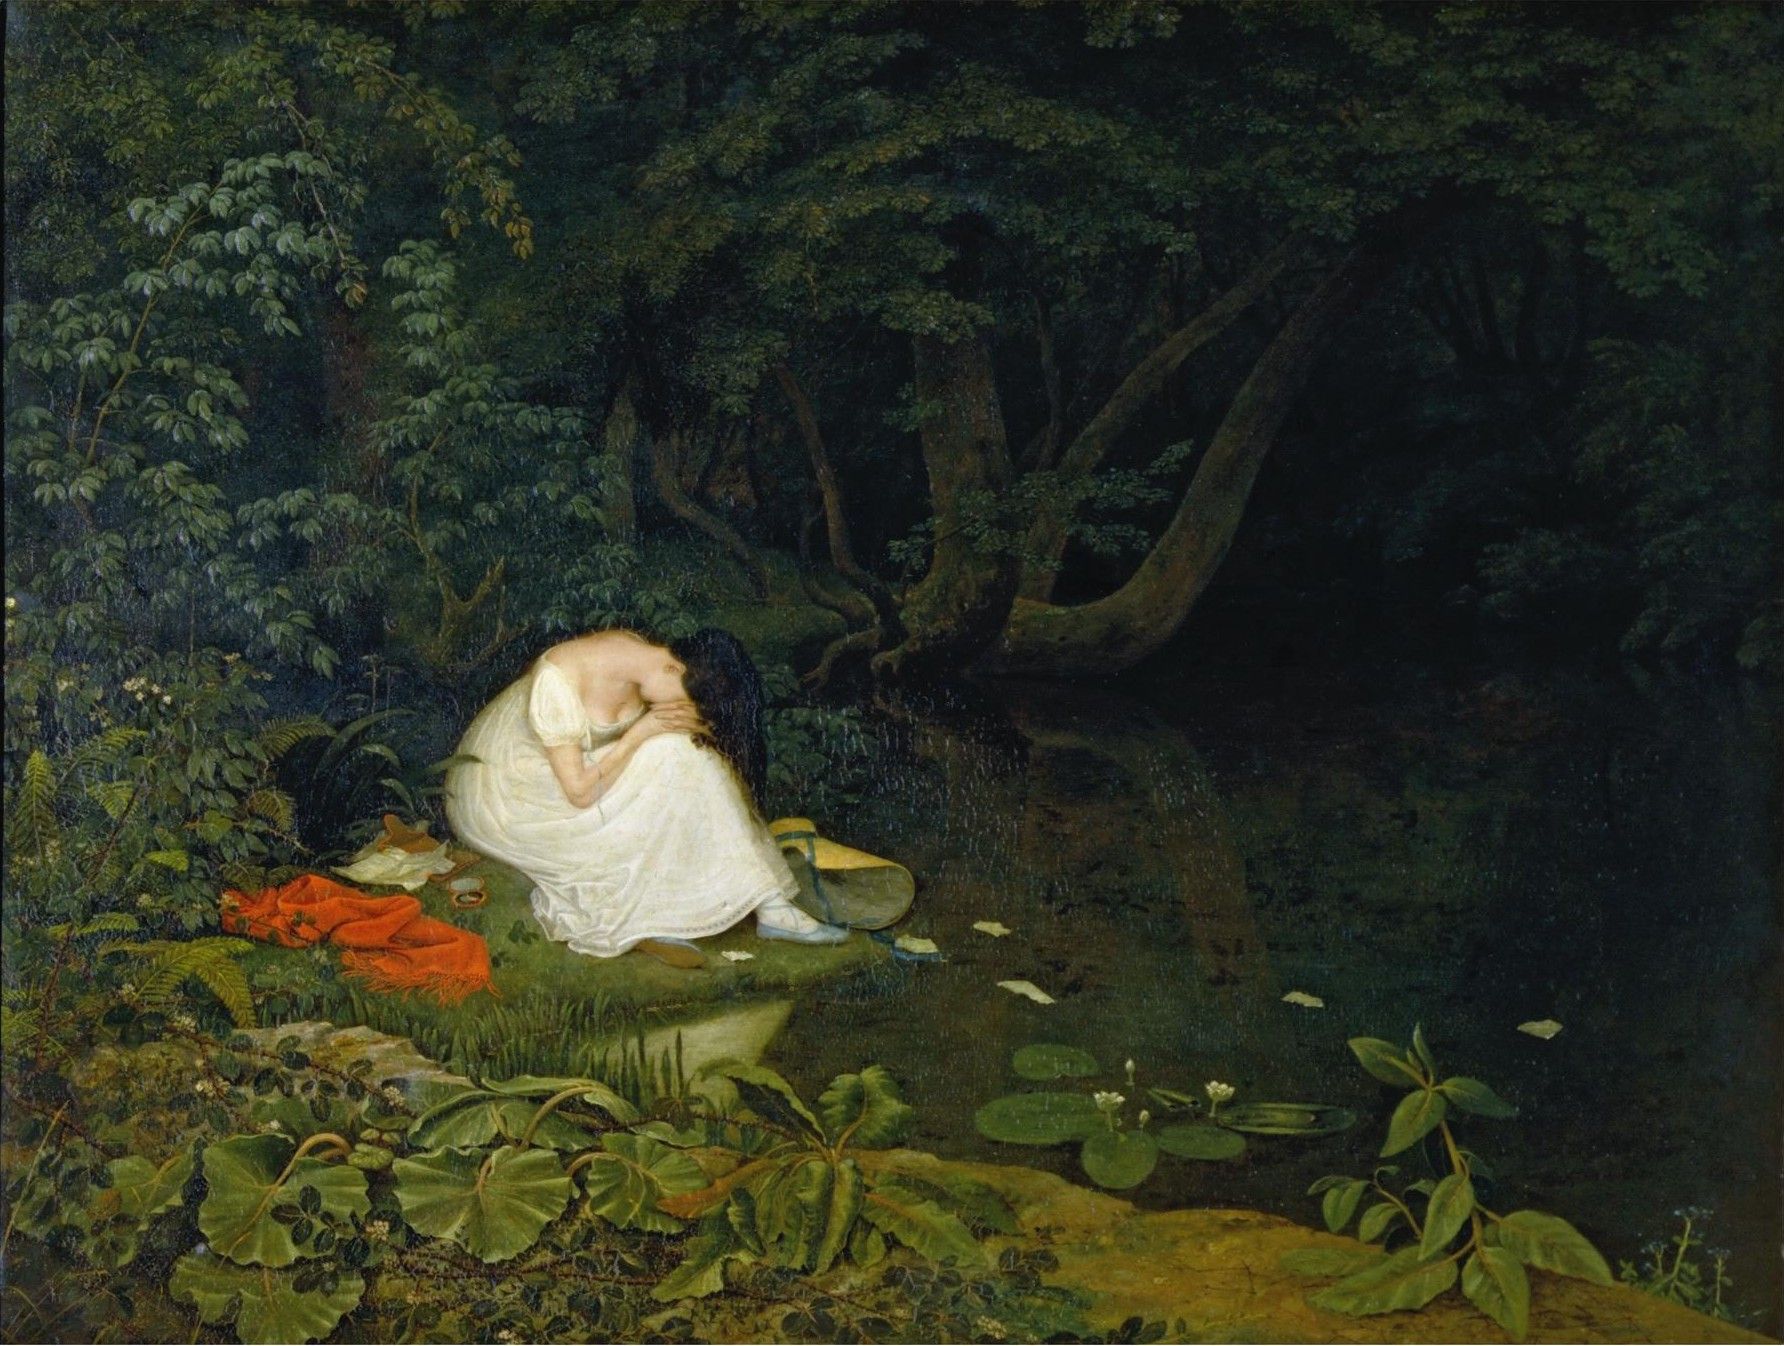 Disappointed Love by Francis Danby - 1821 - 62.8 x 81.2 cm 